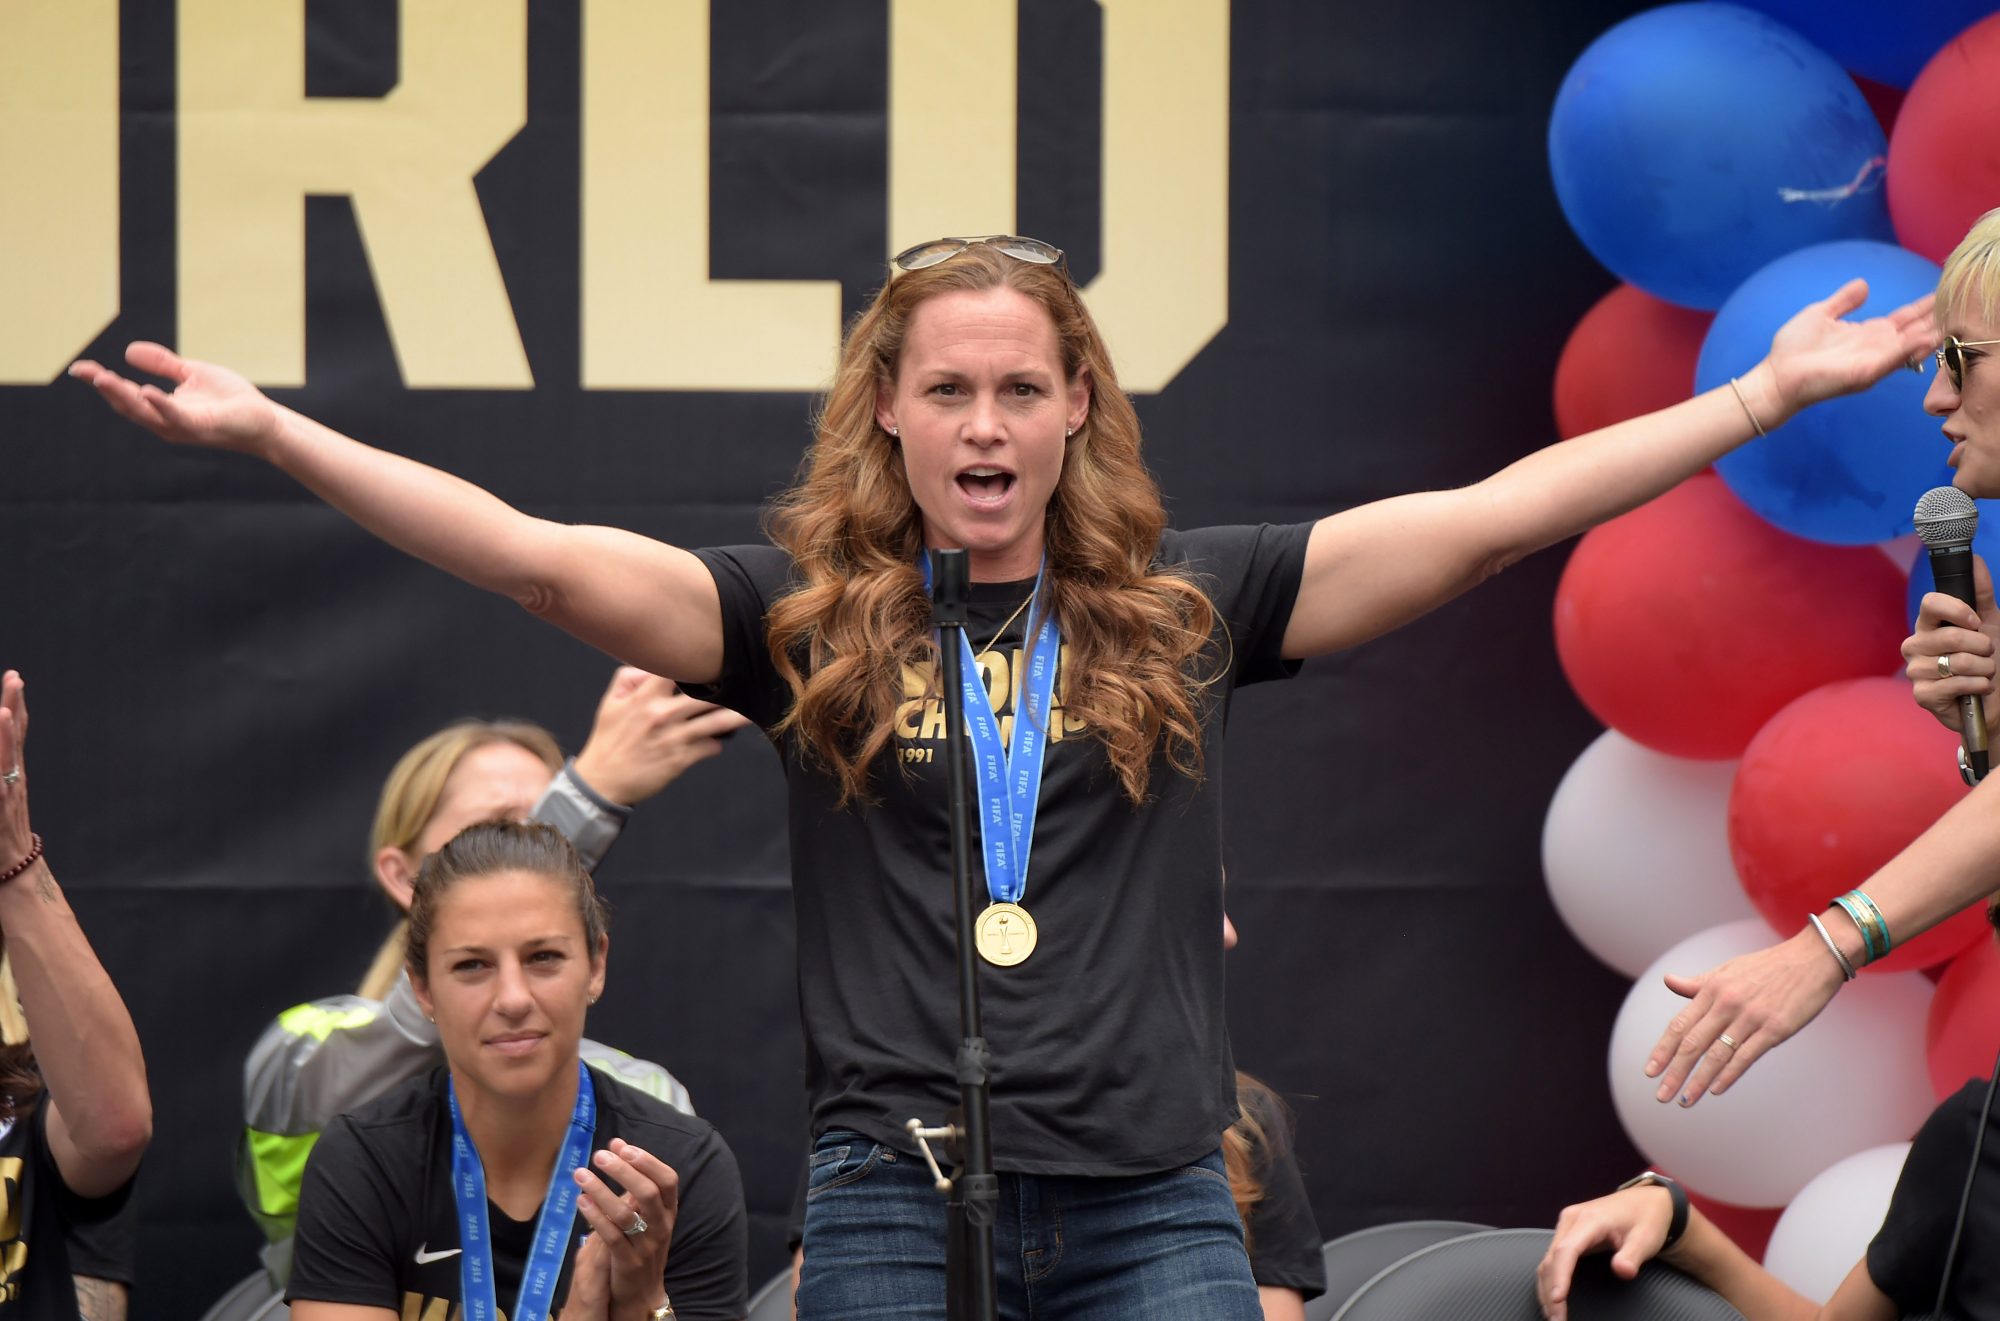 Local hero Christie Rampone to be honored by the USWNT 4